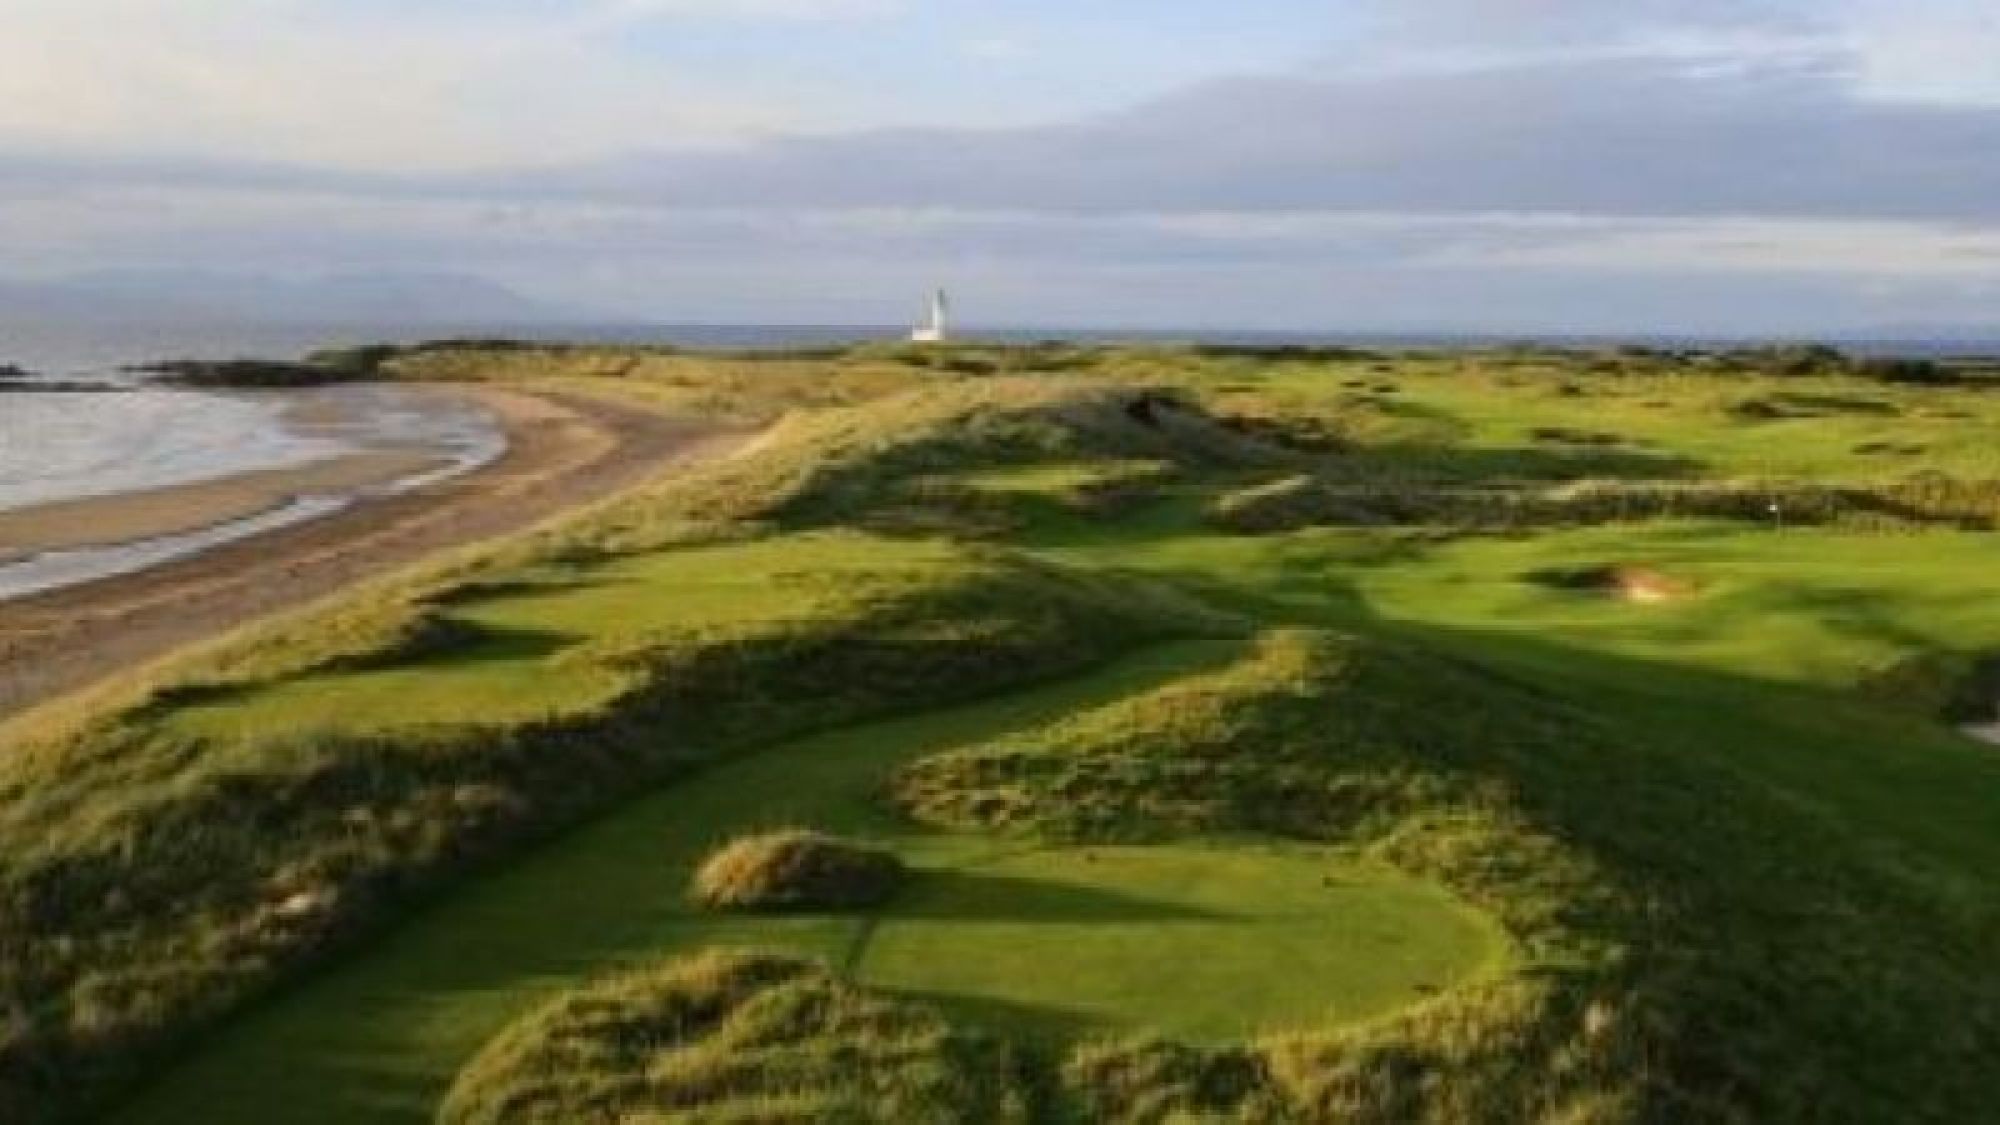 All The Trump Turnberry Golf's beautiful golf course within marvelous Scotland.